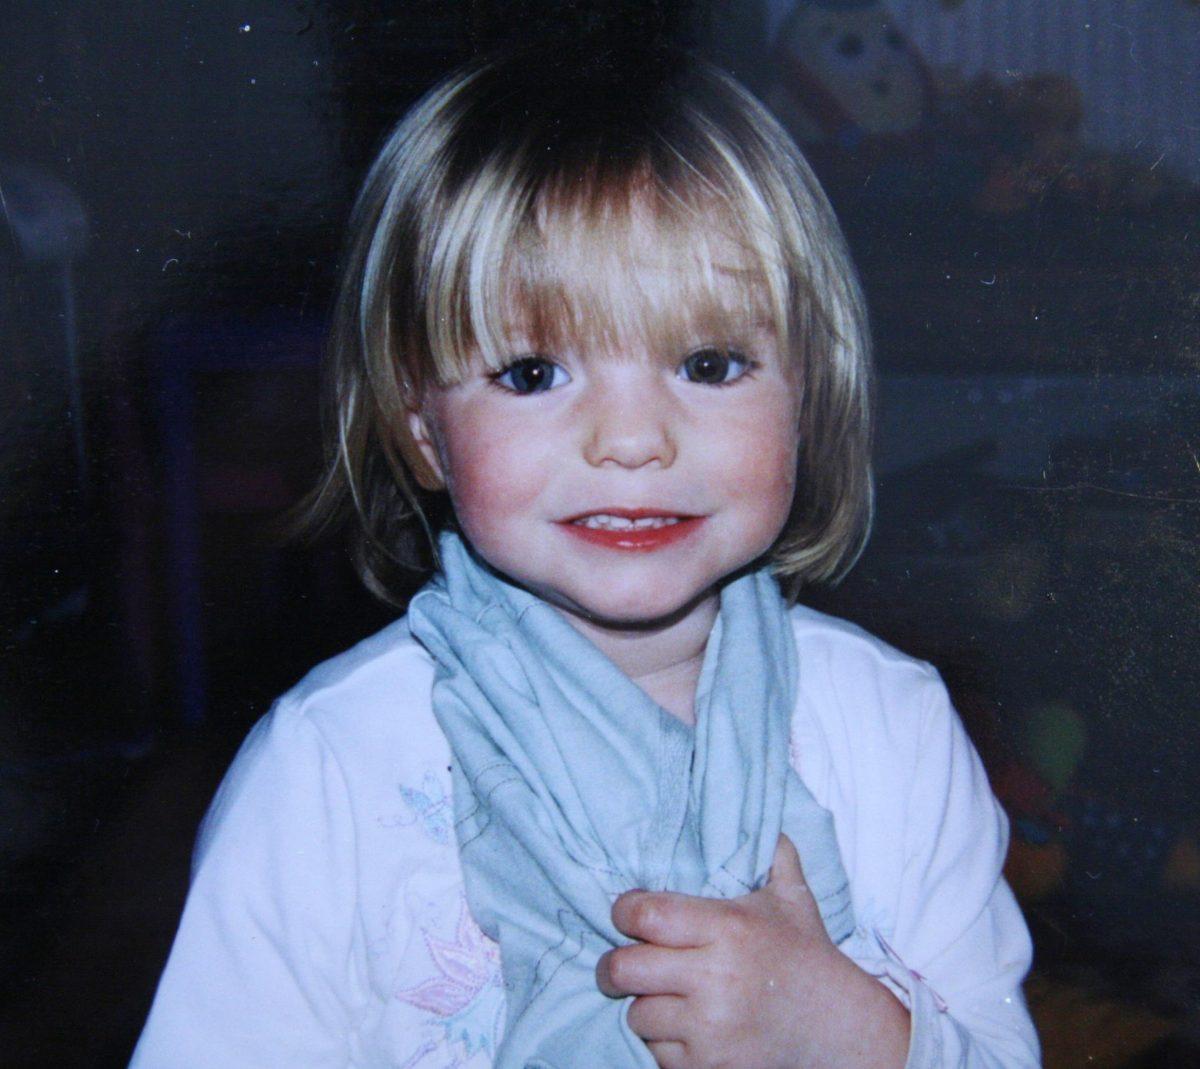 Photo of missing Madeleine McCann released September 16, 2007. (Handout/Getty Images)